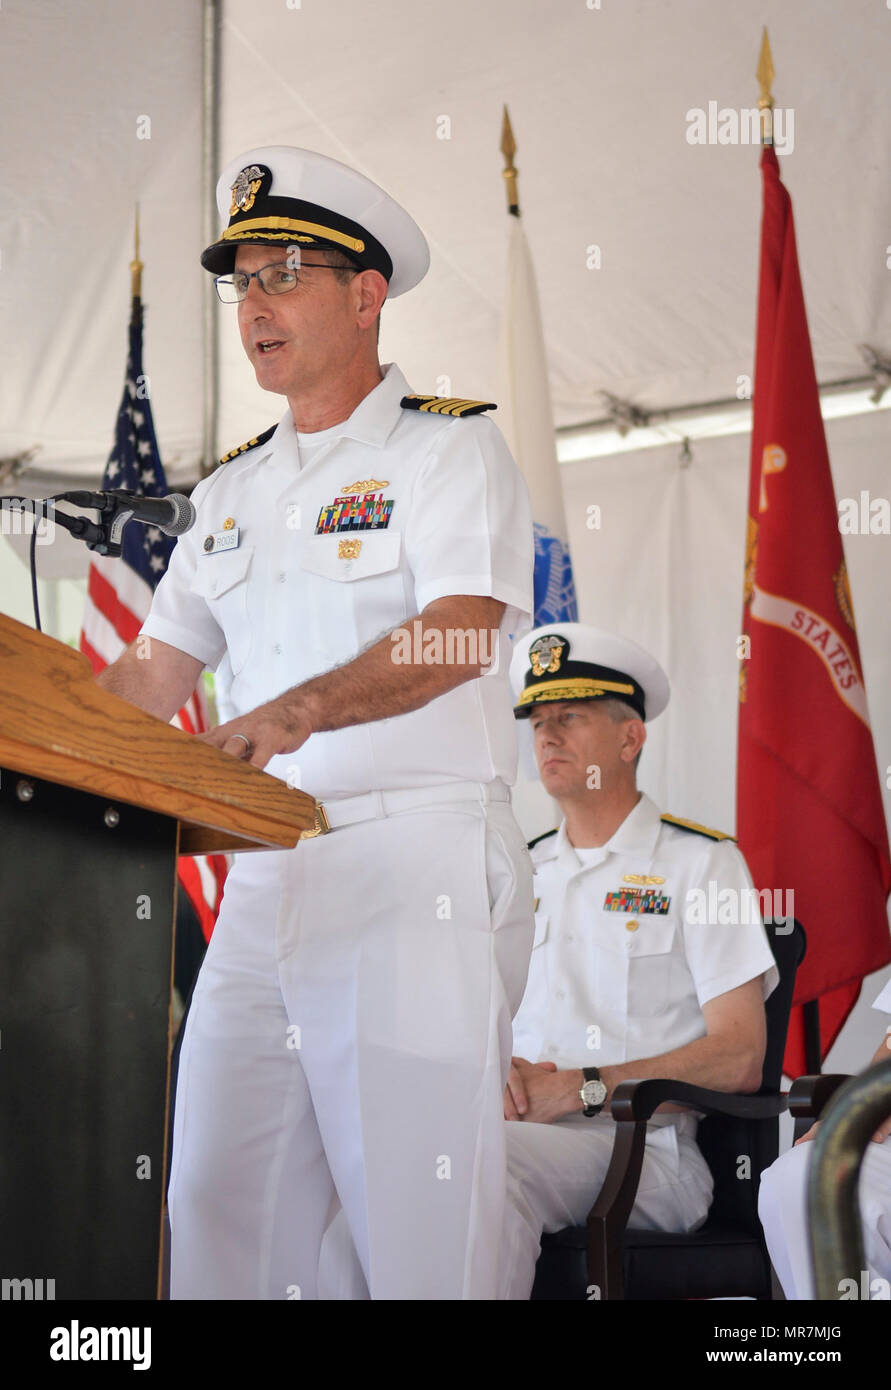 170517-N-IW246-097 SAN DIEGO (May 19, 2017) Commanding Officer Naval Medical Center San Diego (NMCSD), Capt. Joel A. Roos, introduces guest speaker Rear Adm. Paul D. Pearigen, Commander, Navy Medicine West and chief of the Navy Medical Corps, during NMCSD’s centennial ceremony. The ceremony was held to celebrate NMCSD’s 100th birthday. The Navy’s first permanent medical facility in San Diego was established in Balboa Park on May 20, 1917. (Photos by Culinary Specialist Petty Officer 2nd Class Luther C. Smith Jr./Released) Stock Photo